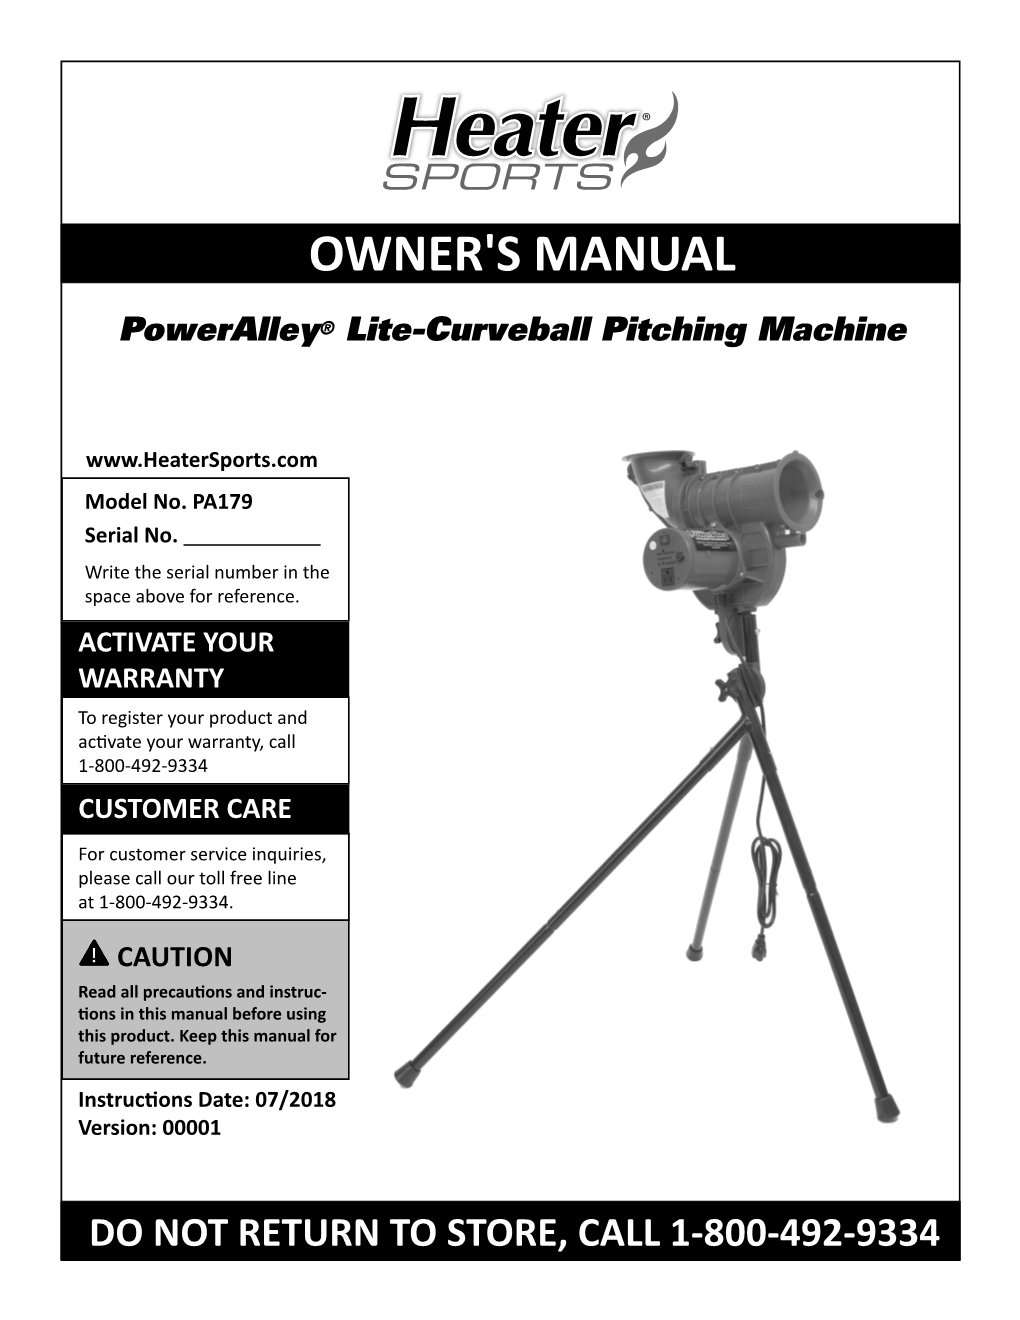 OWNER's MANUAL Poweralley® Lite-Curveball Pitching Machine